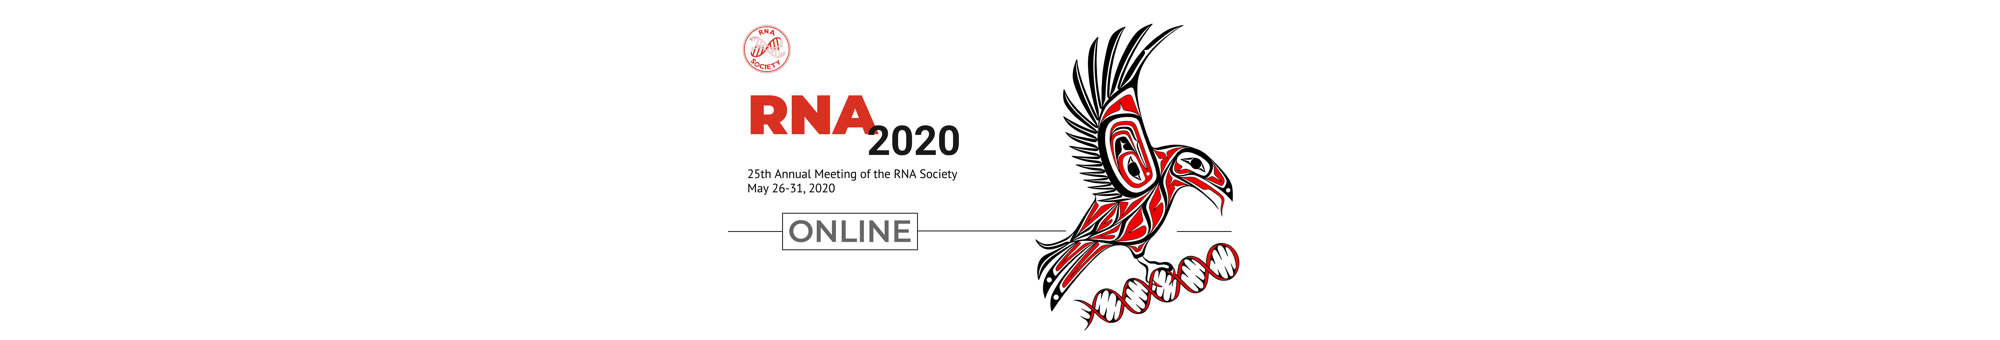 The banner to welcome you to 25th Annual Meeting of the RNA Society